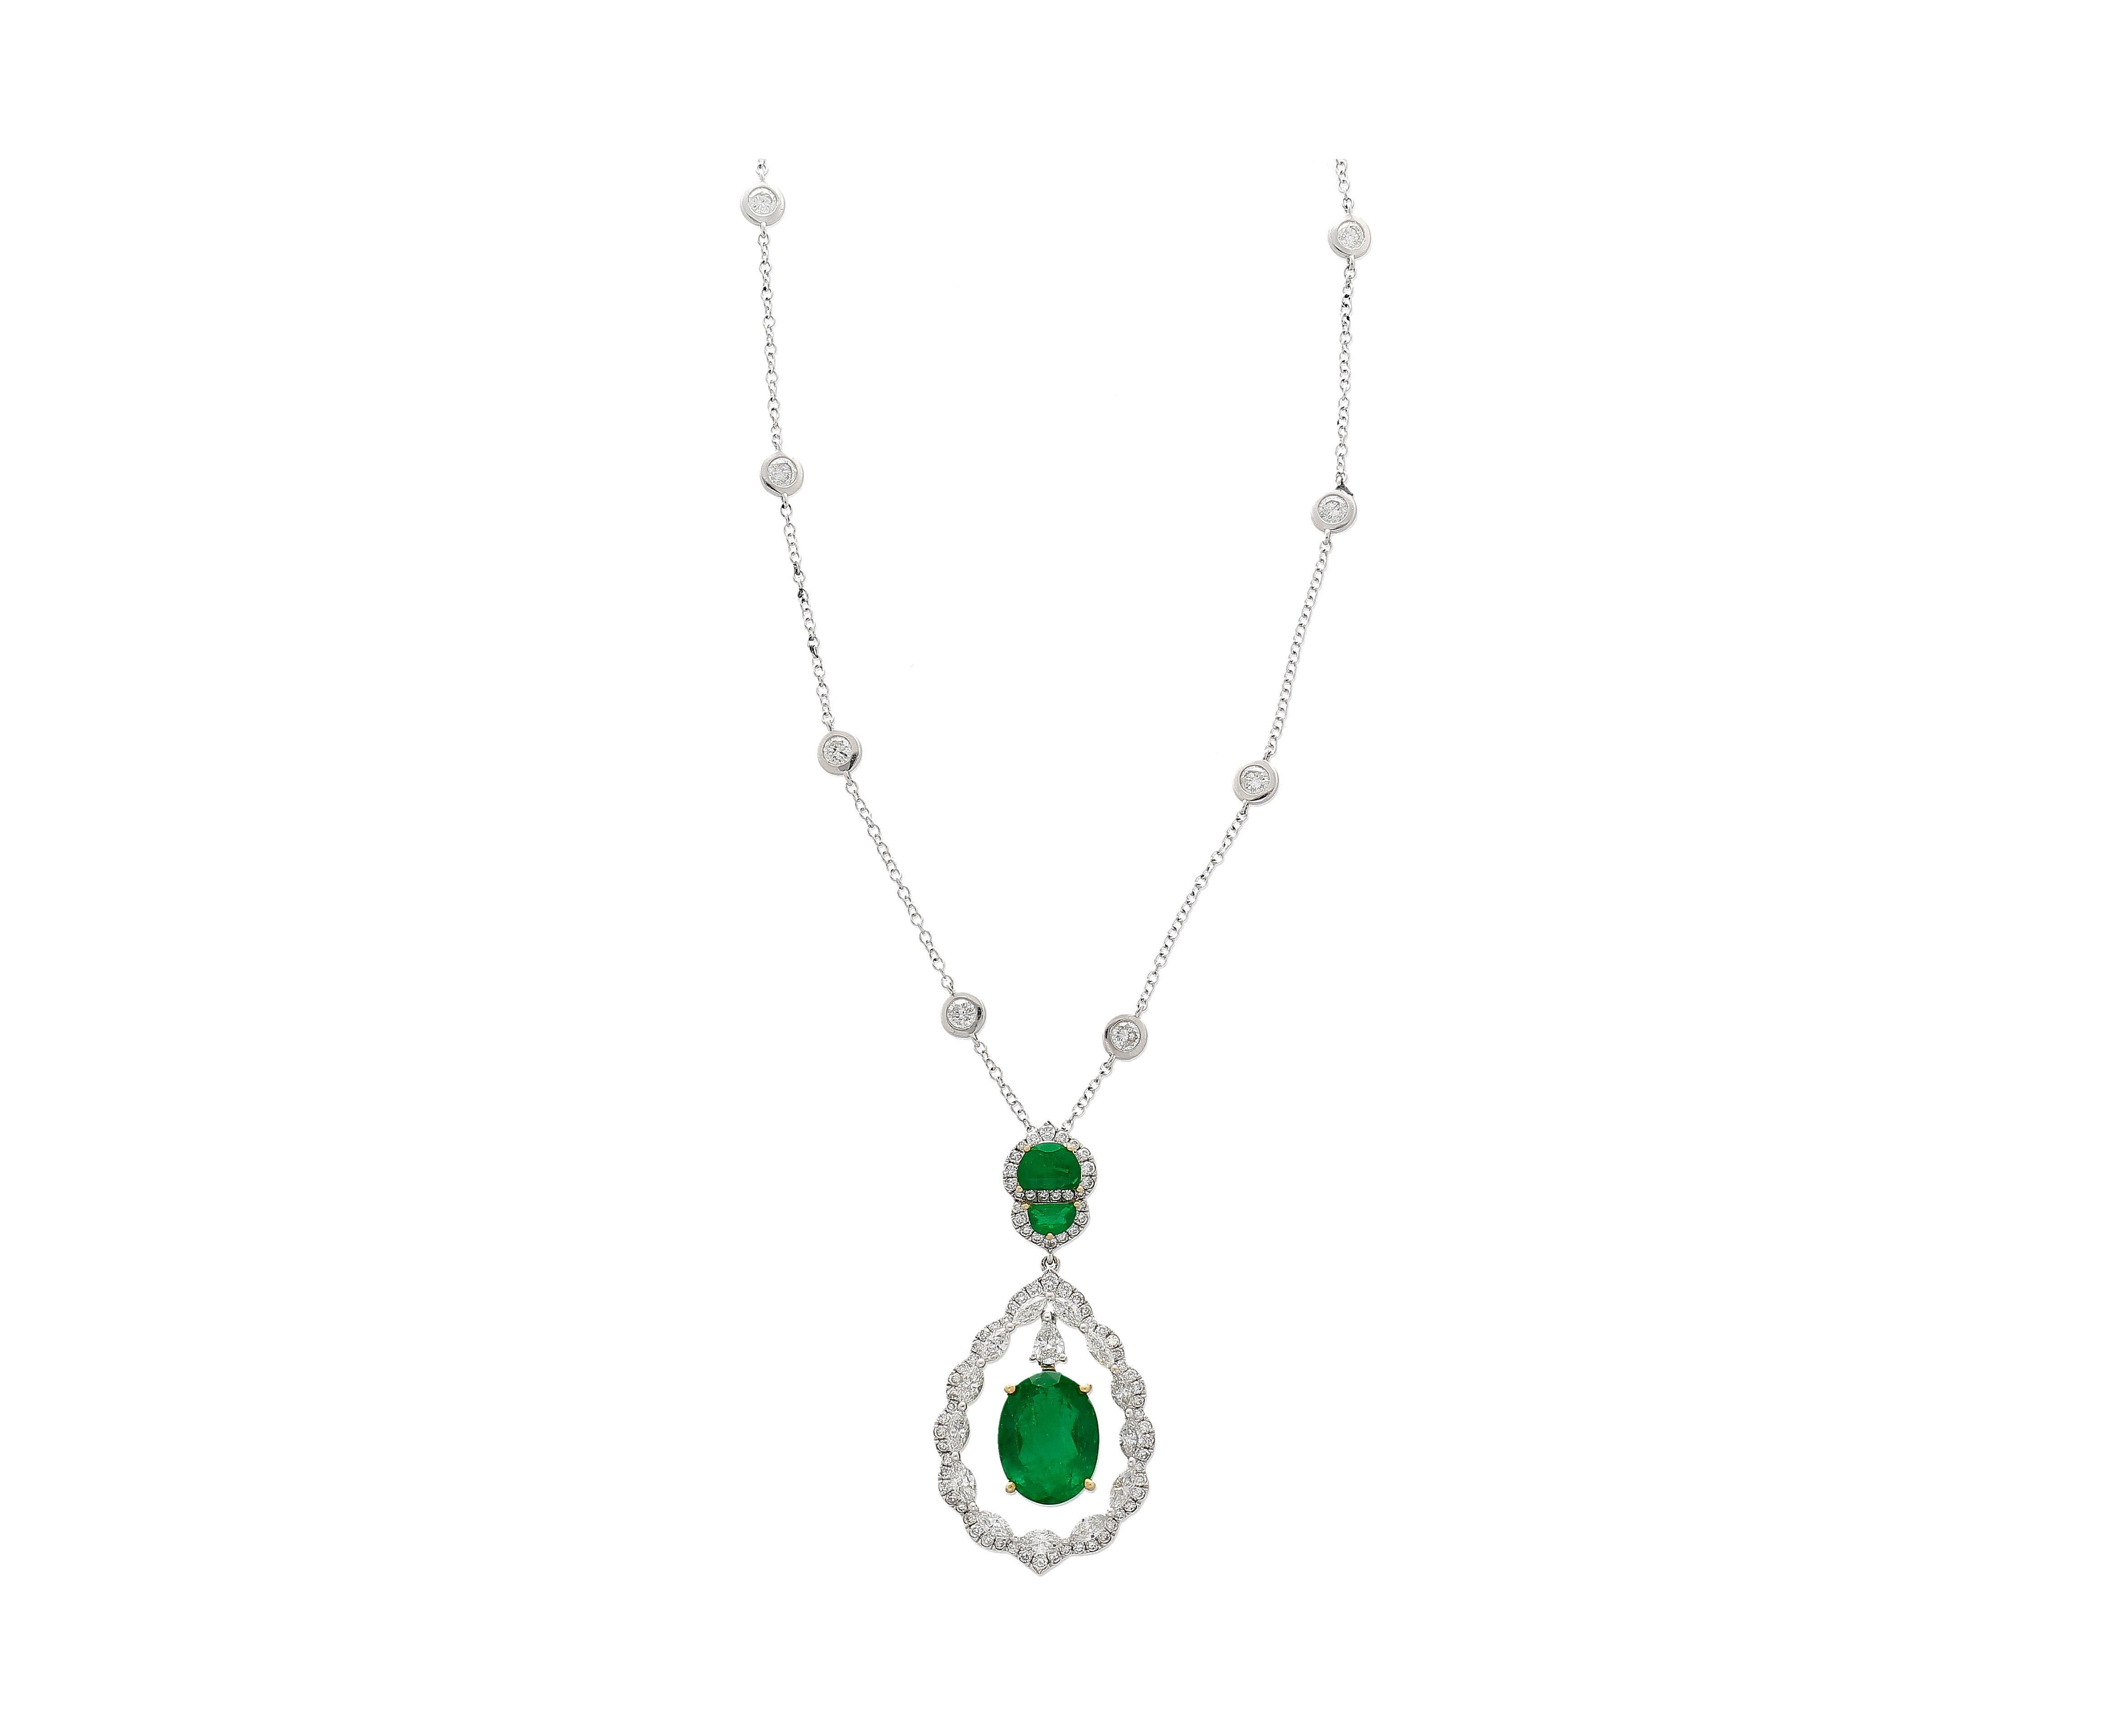 6.42 Carat Floating Emerald with Diamond & Emeralds in 18K Pendant Necklace For Sale 5